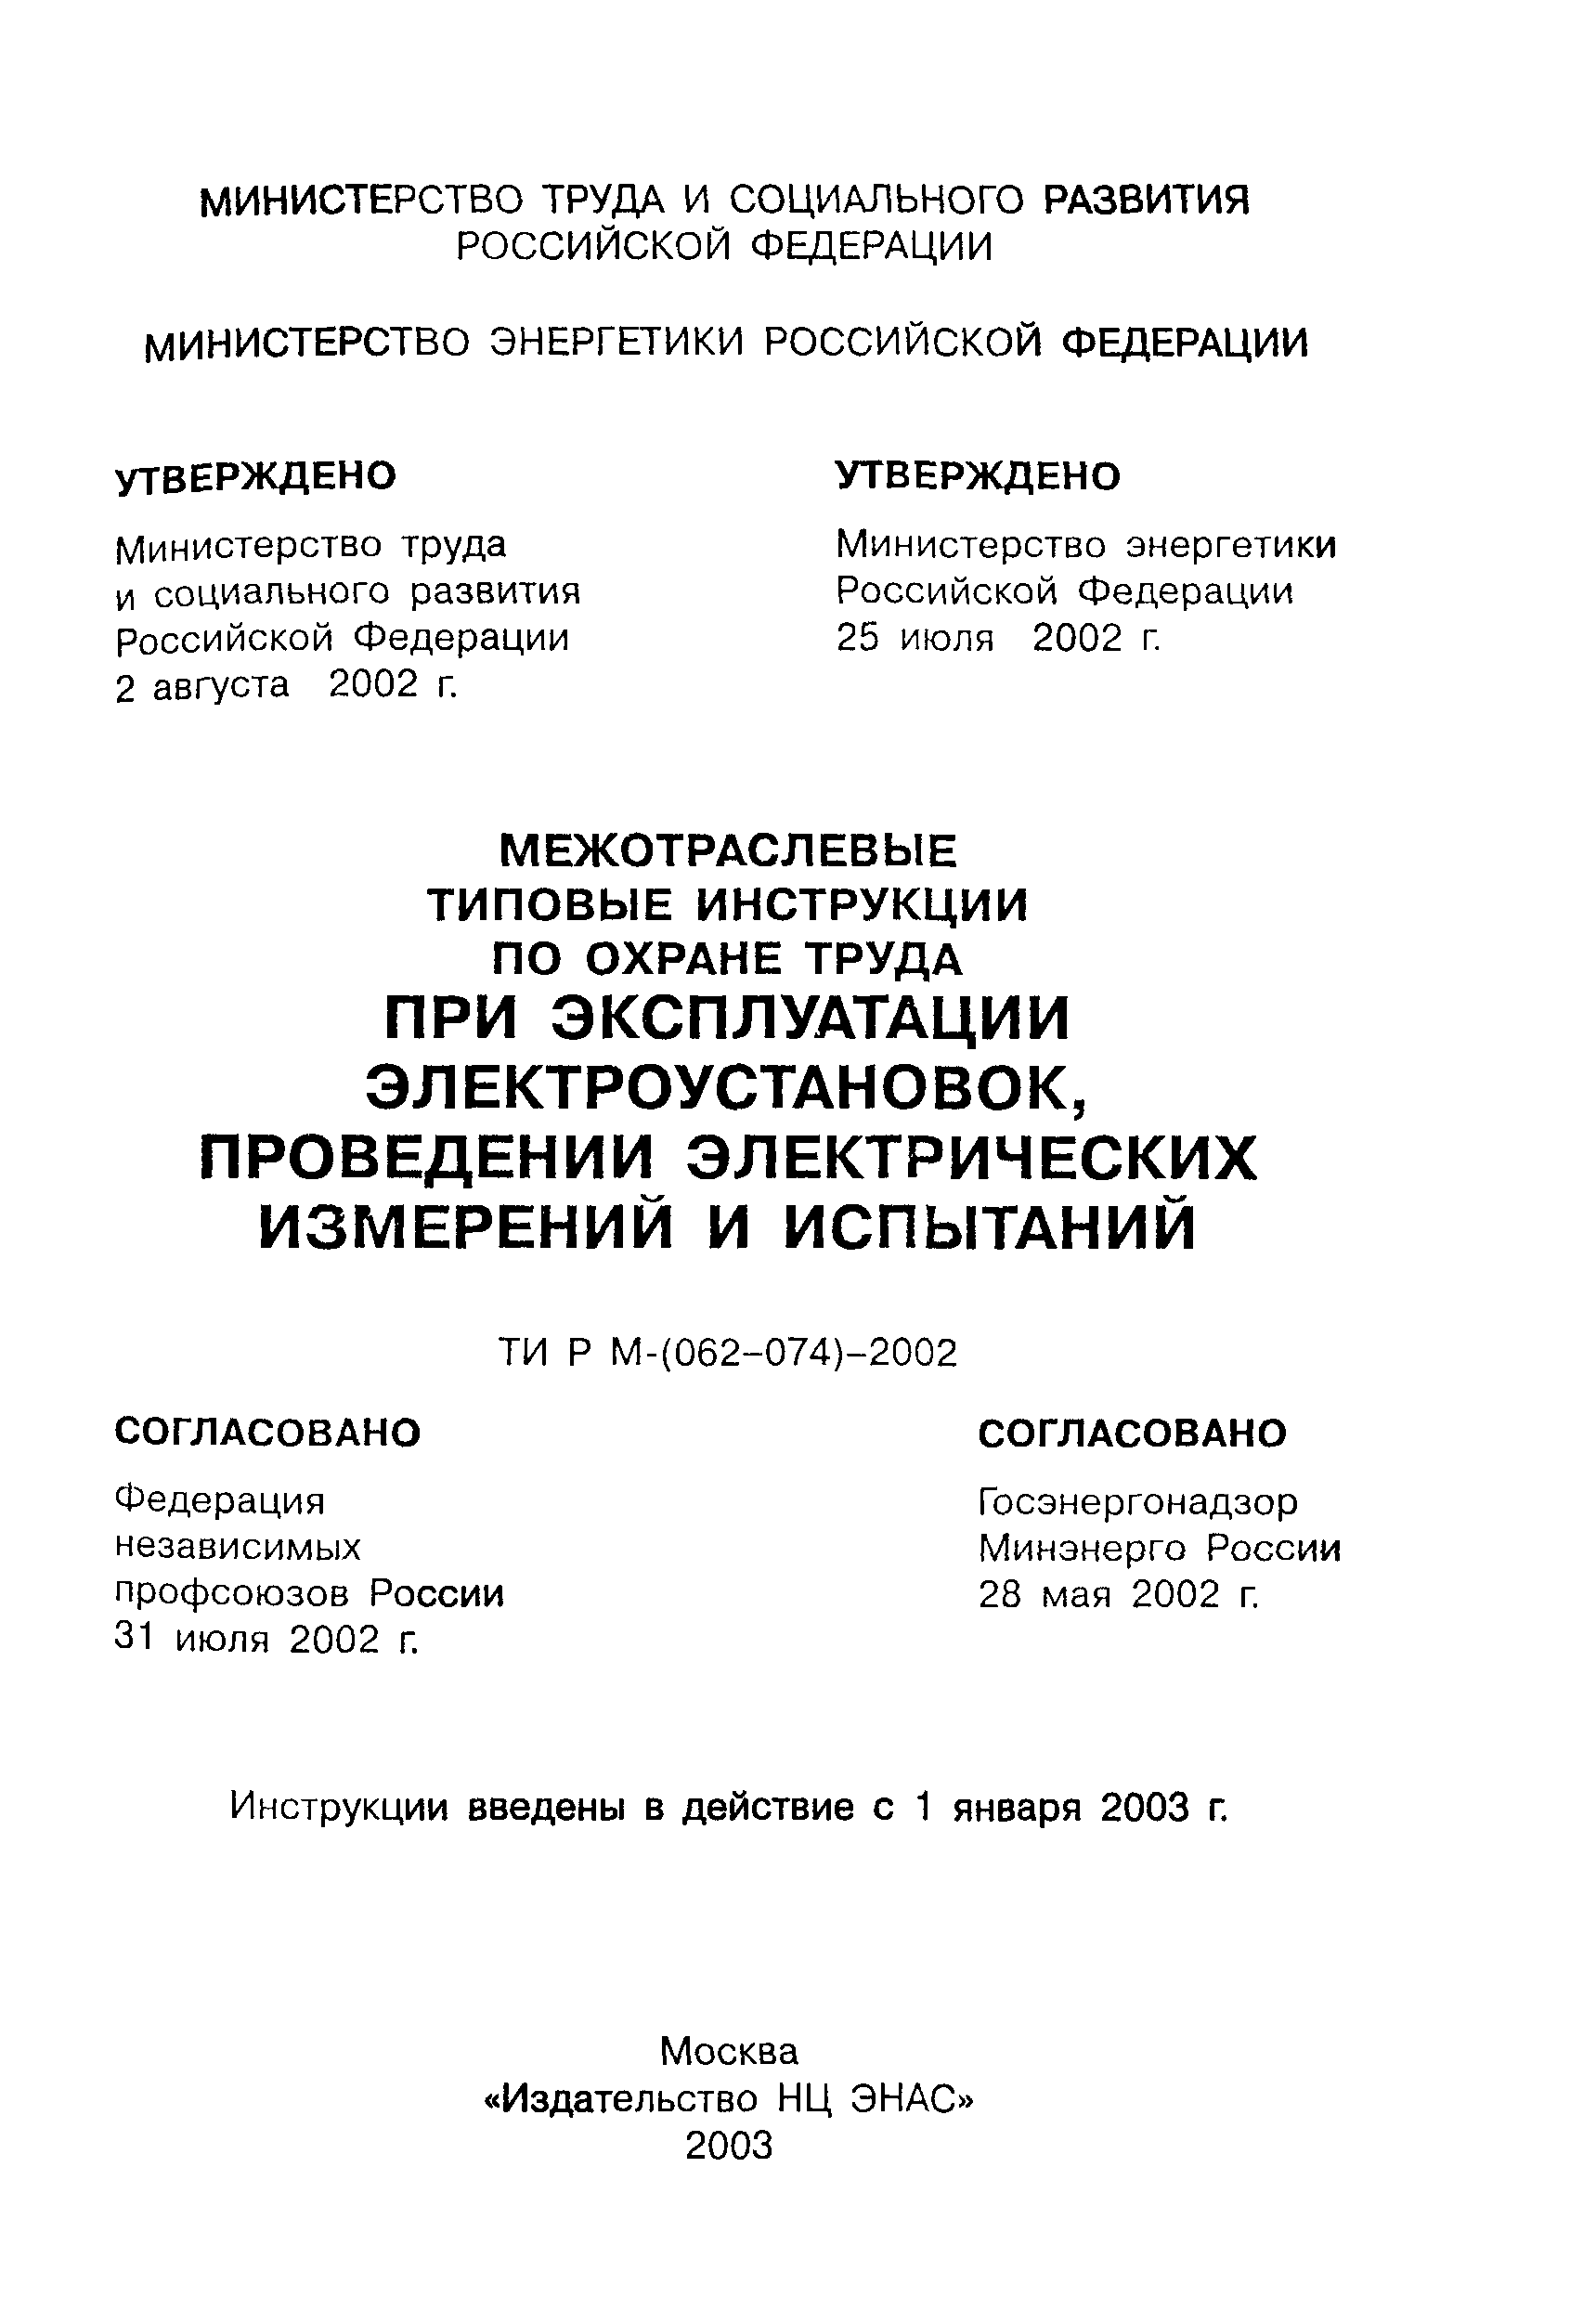 ТИ Р М-074-2002